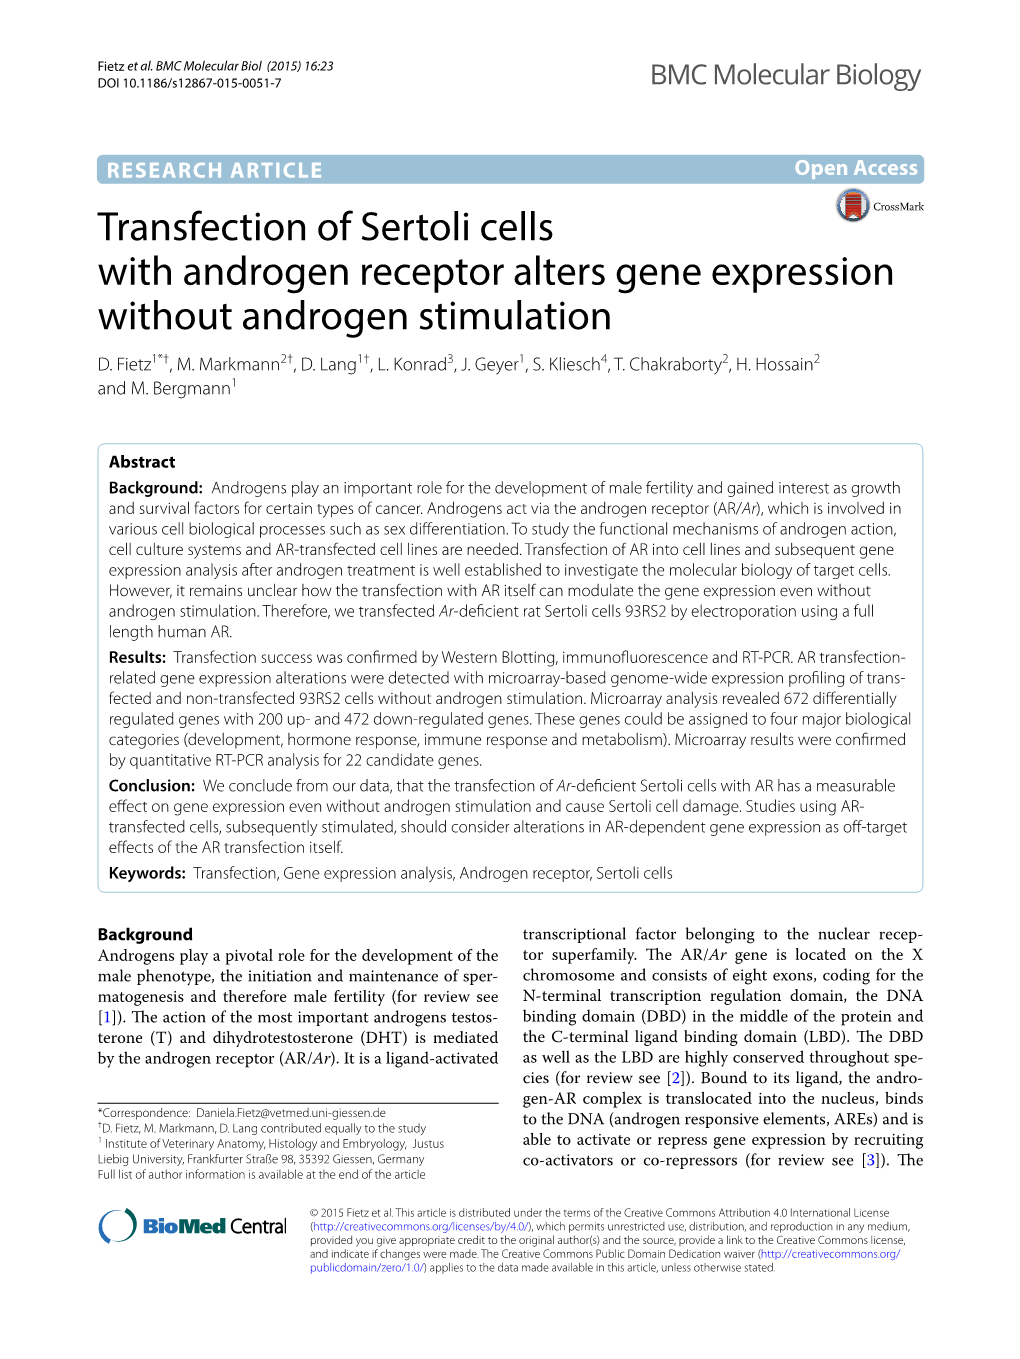 Transfection of Sertoli Cells with Androgen Receptor Alters Gene Expression Without Androgen Stimulation D